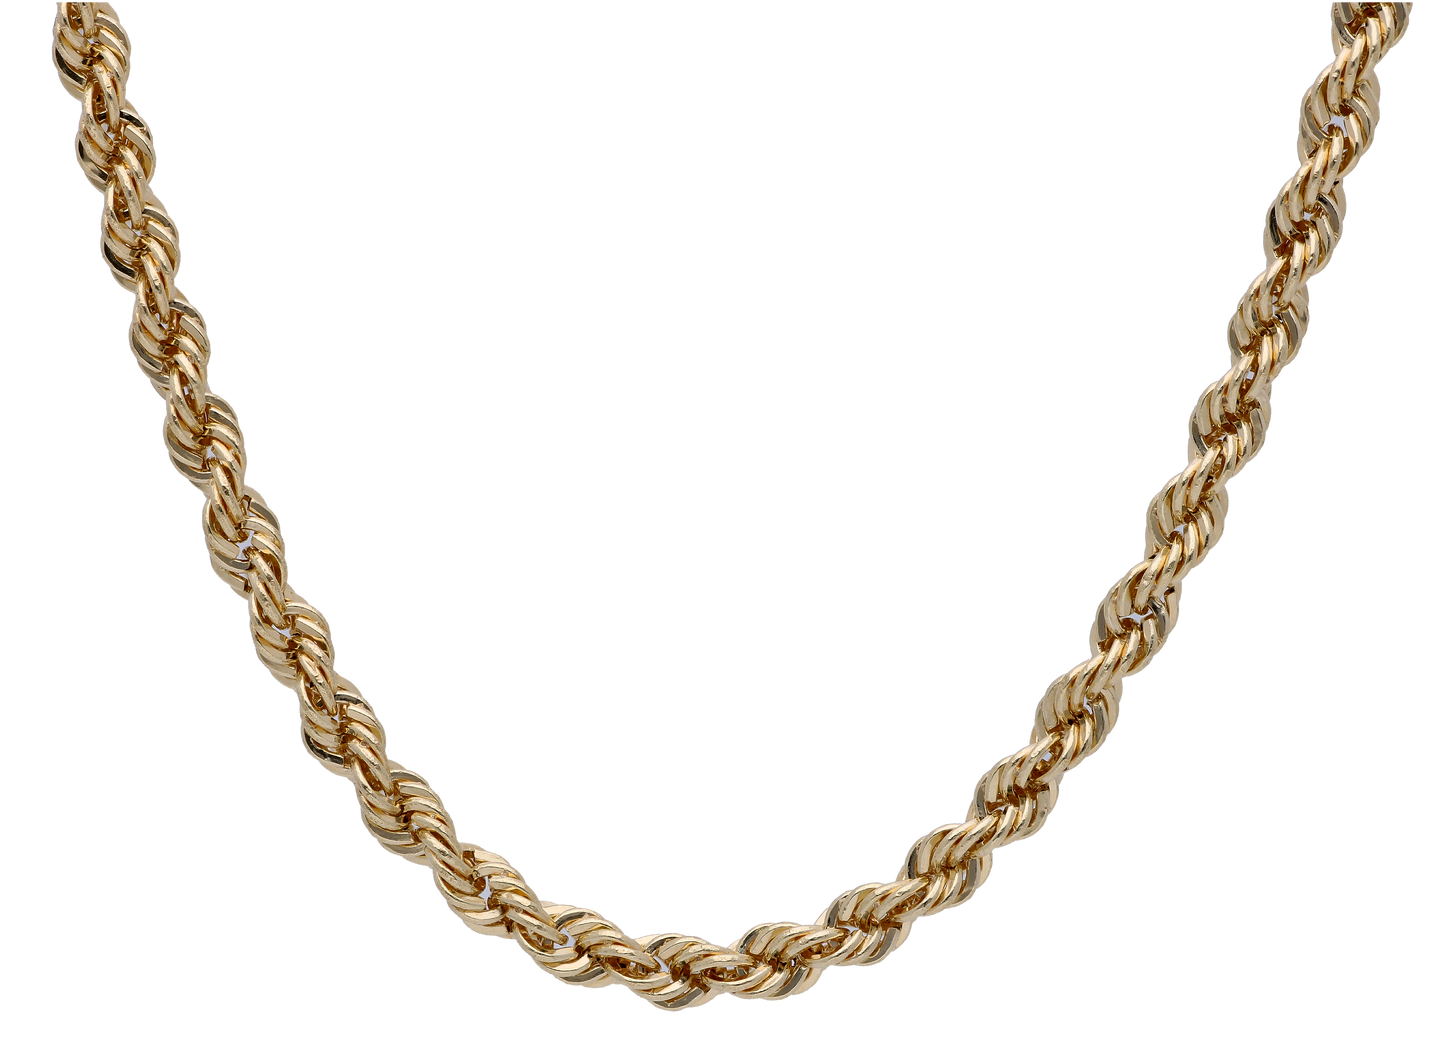 Gold 18 Inches Rope Chain in 18KT - FKJCN18KU6312